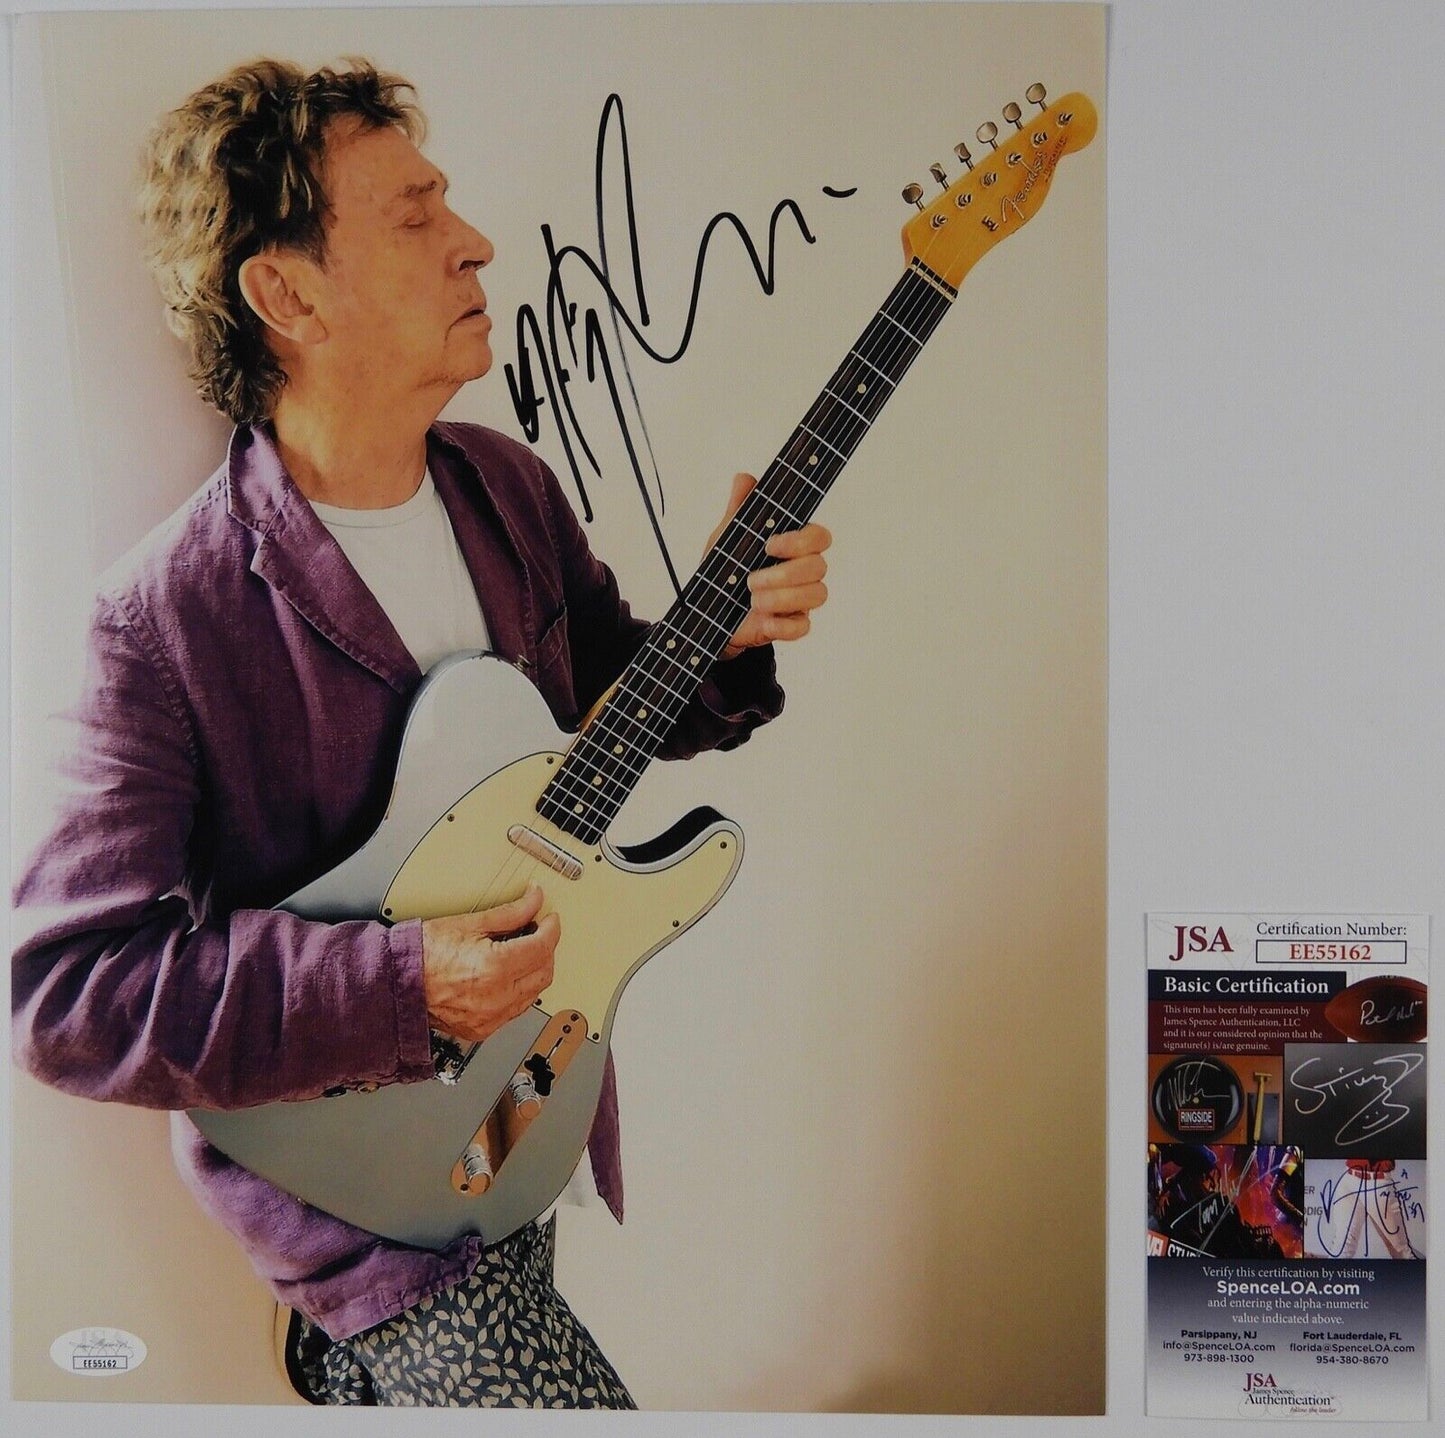 Andy Summers The Police 11 x 14 Photo JSA Signed Autograph